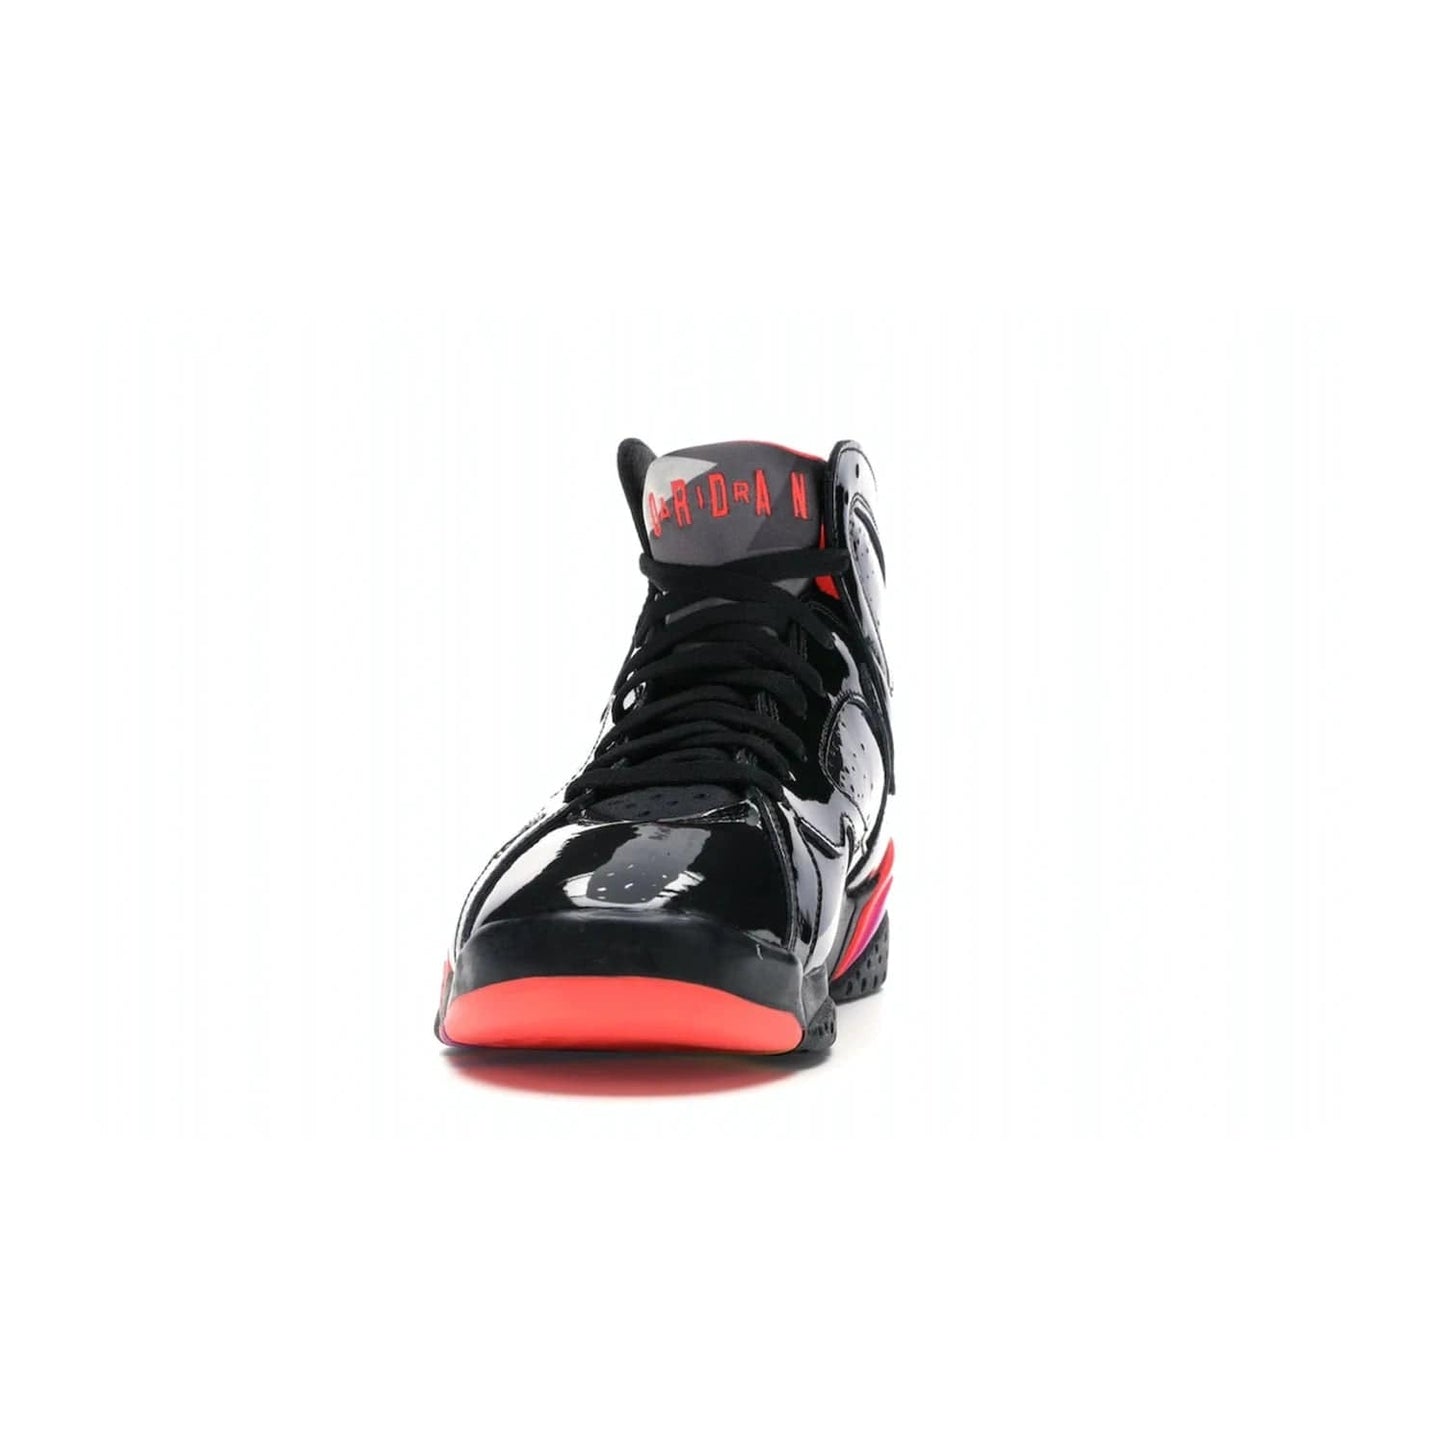 Jordan 7 Retro Black Patent (Women's) - Image 11 - Only at www.BallersClubKickz.com - #
Classic colorway! Shop the new Jordan 7 Retro Black Patent. Featuring a sleek combination of leather and patent leather upper, these shoes offer a bold yet luxurious look. Perfectly complete with a bright red Jumpman logo. Self-lacing Smart laces and Air-Sole cushion unit provide comfort and convenience.